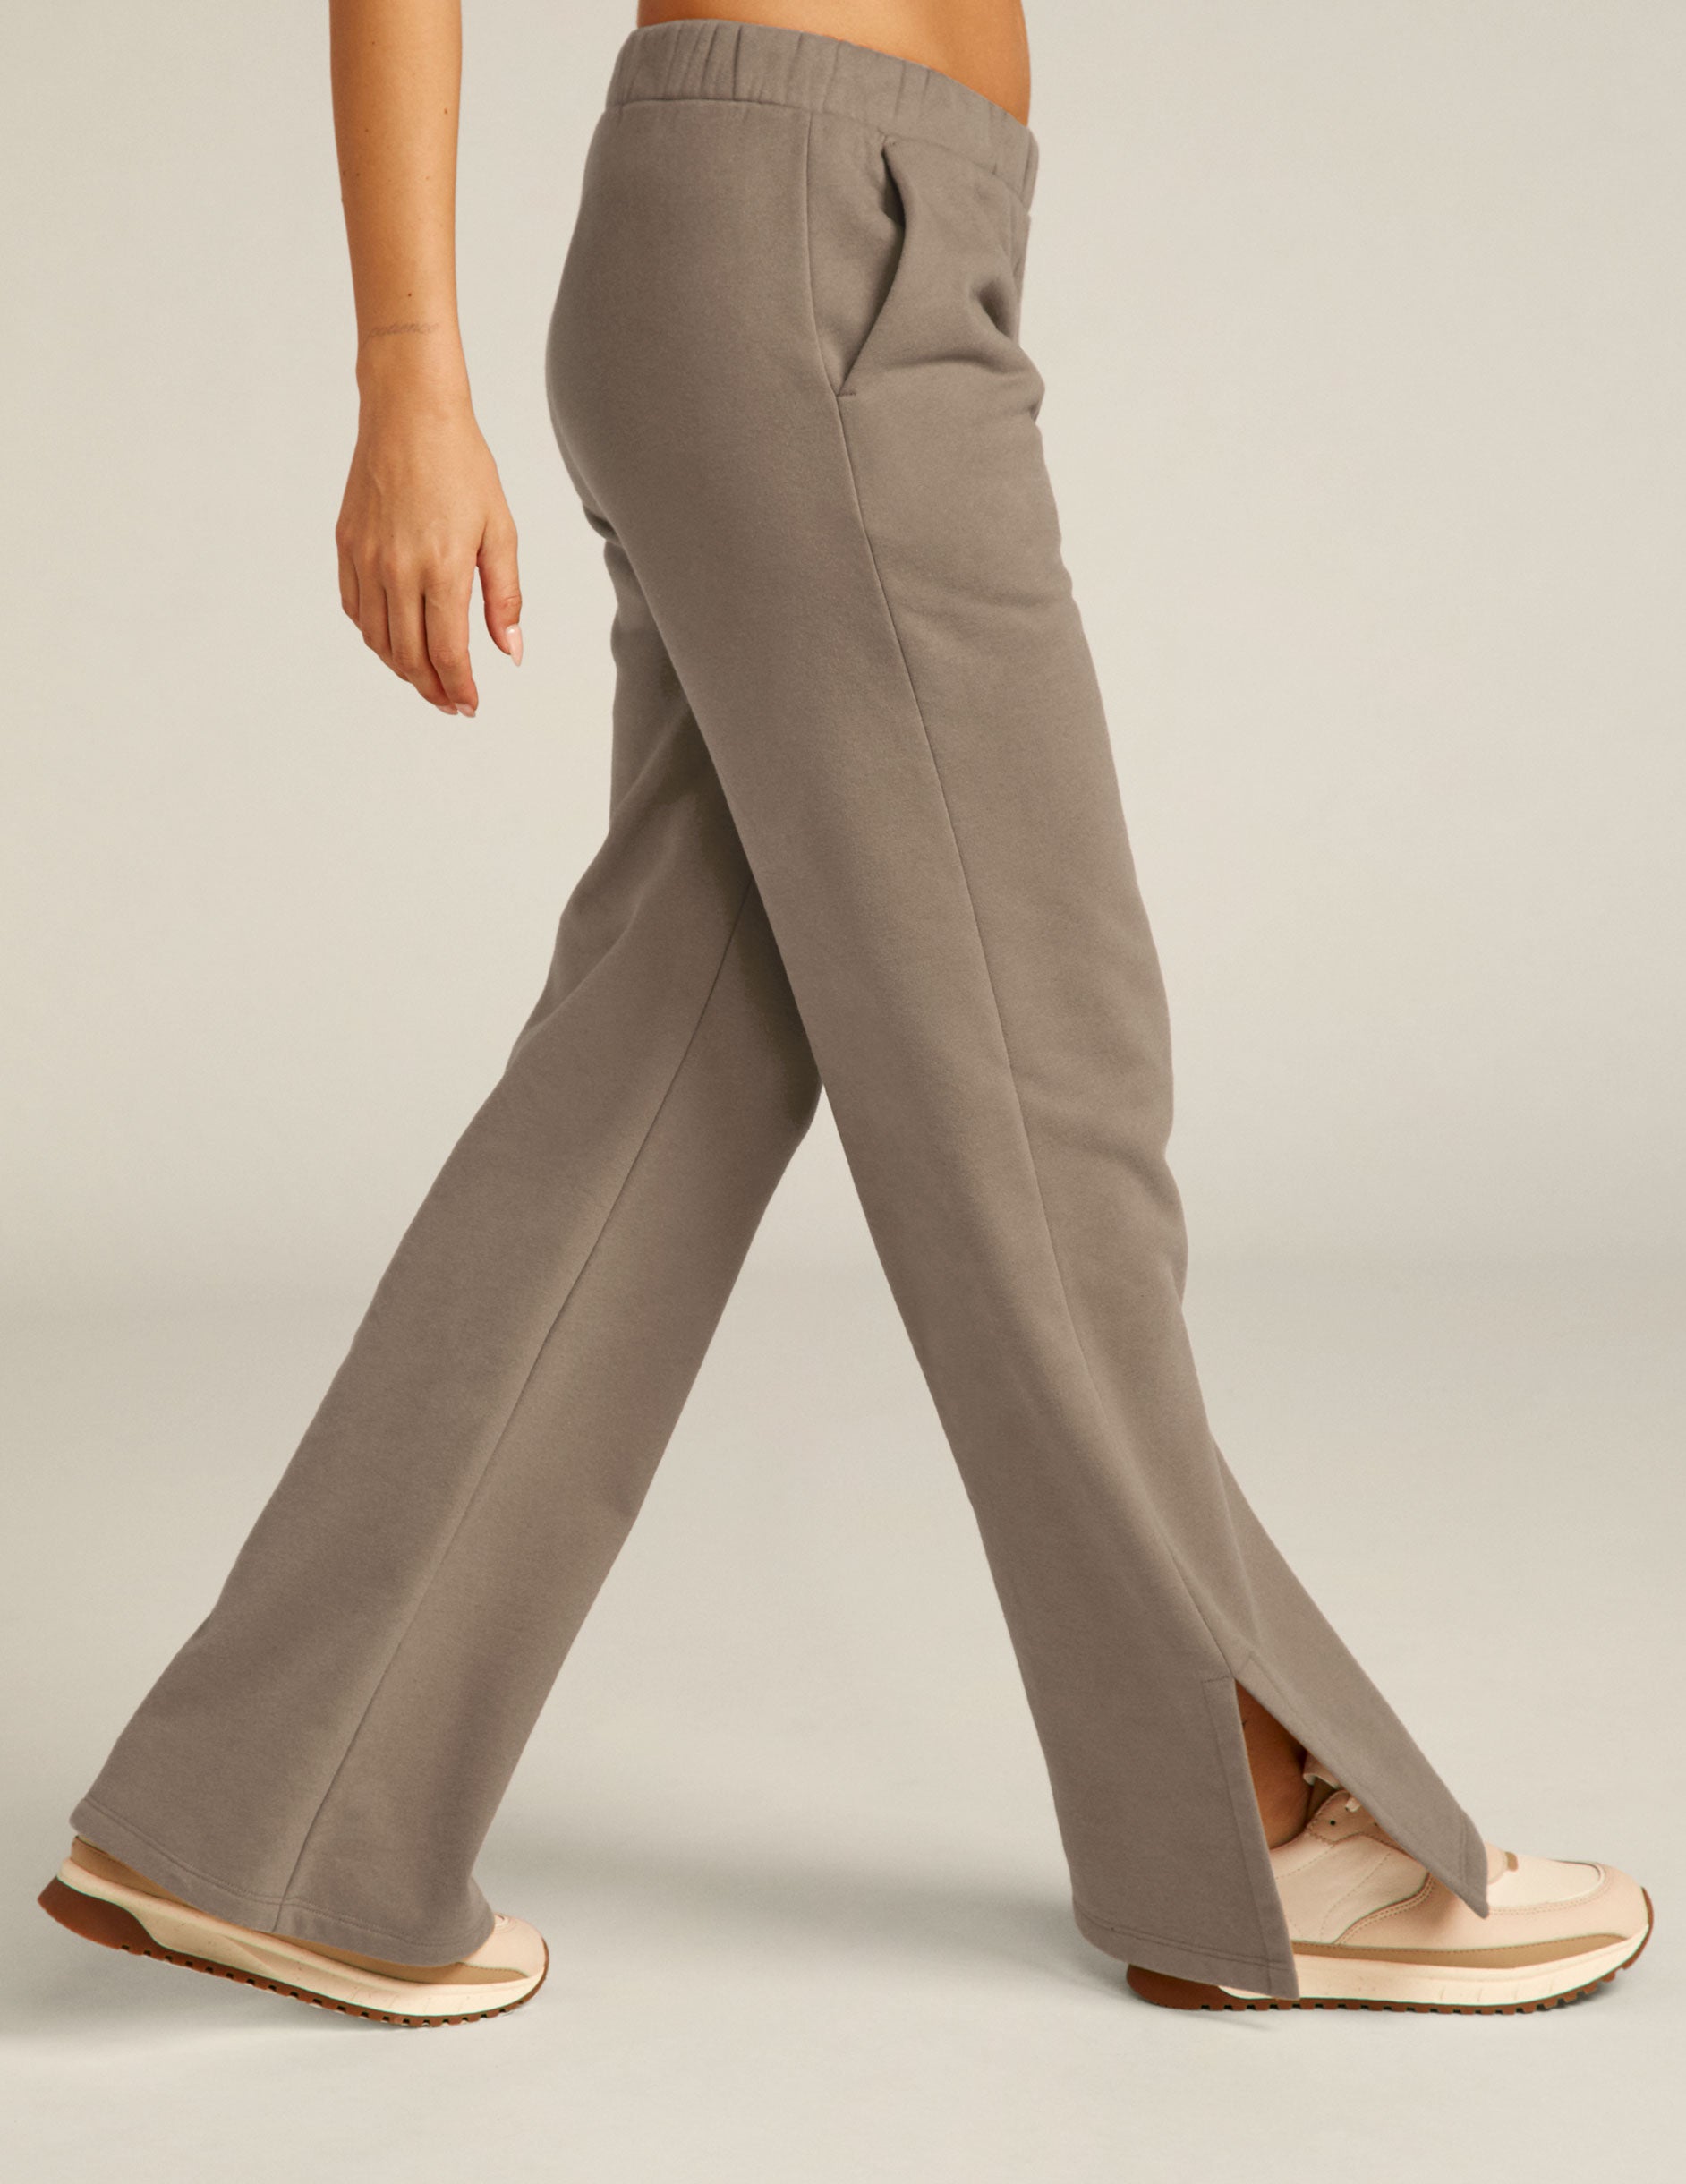 brown high rise pants with pockets and slit hem. 